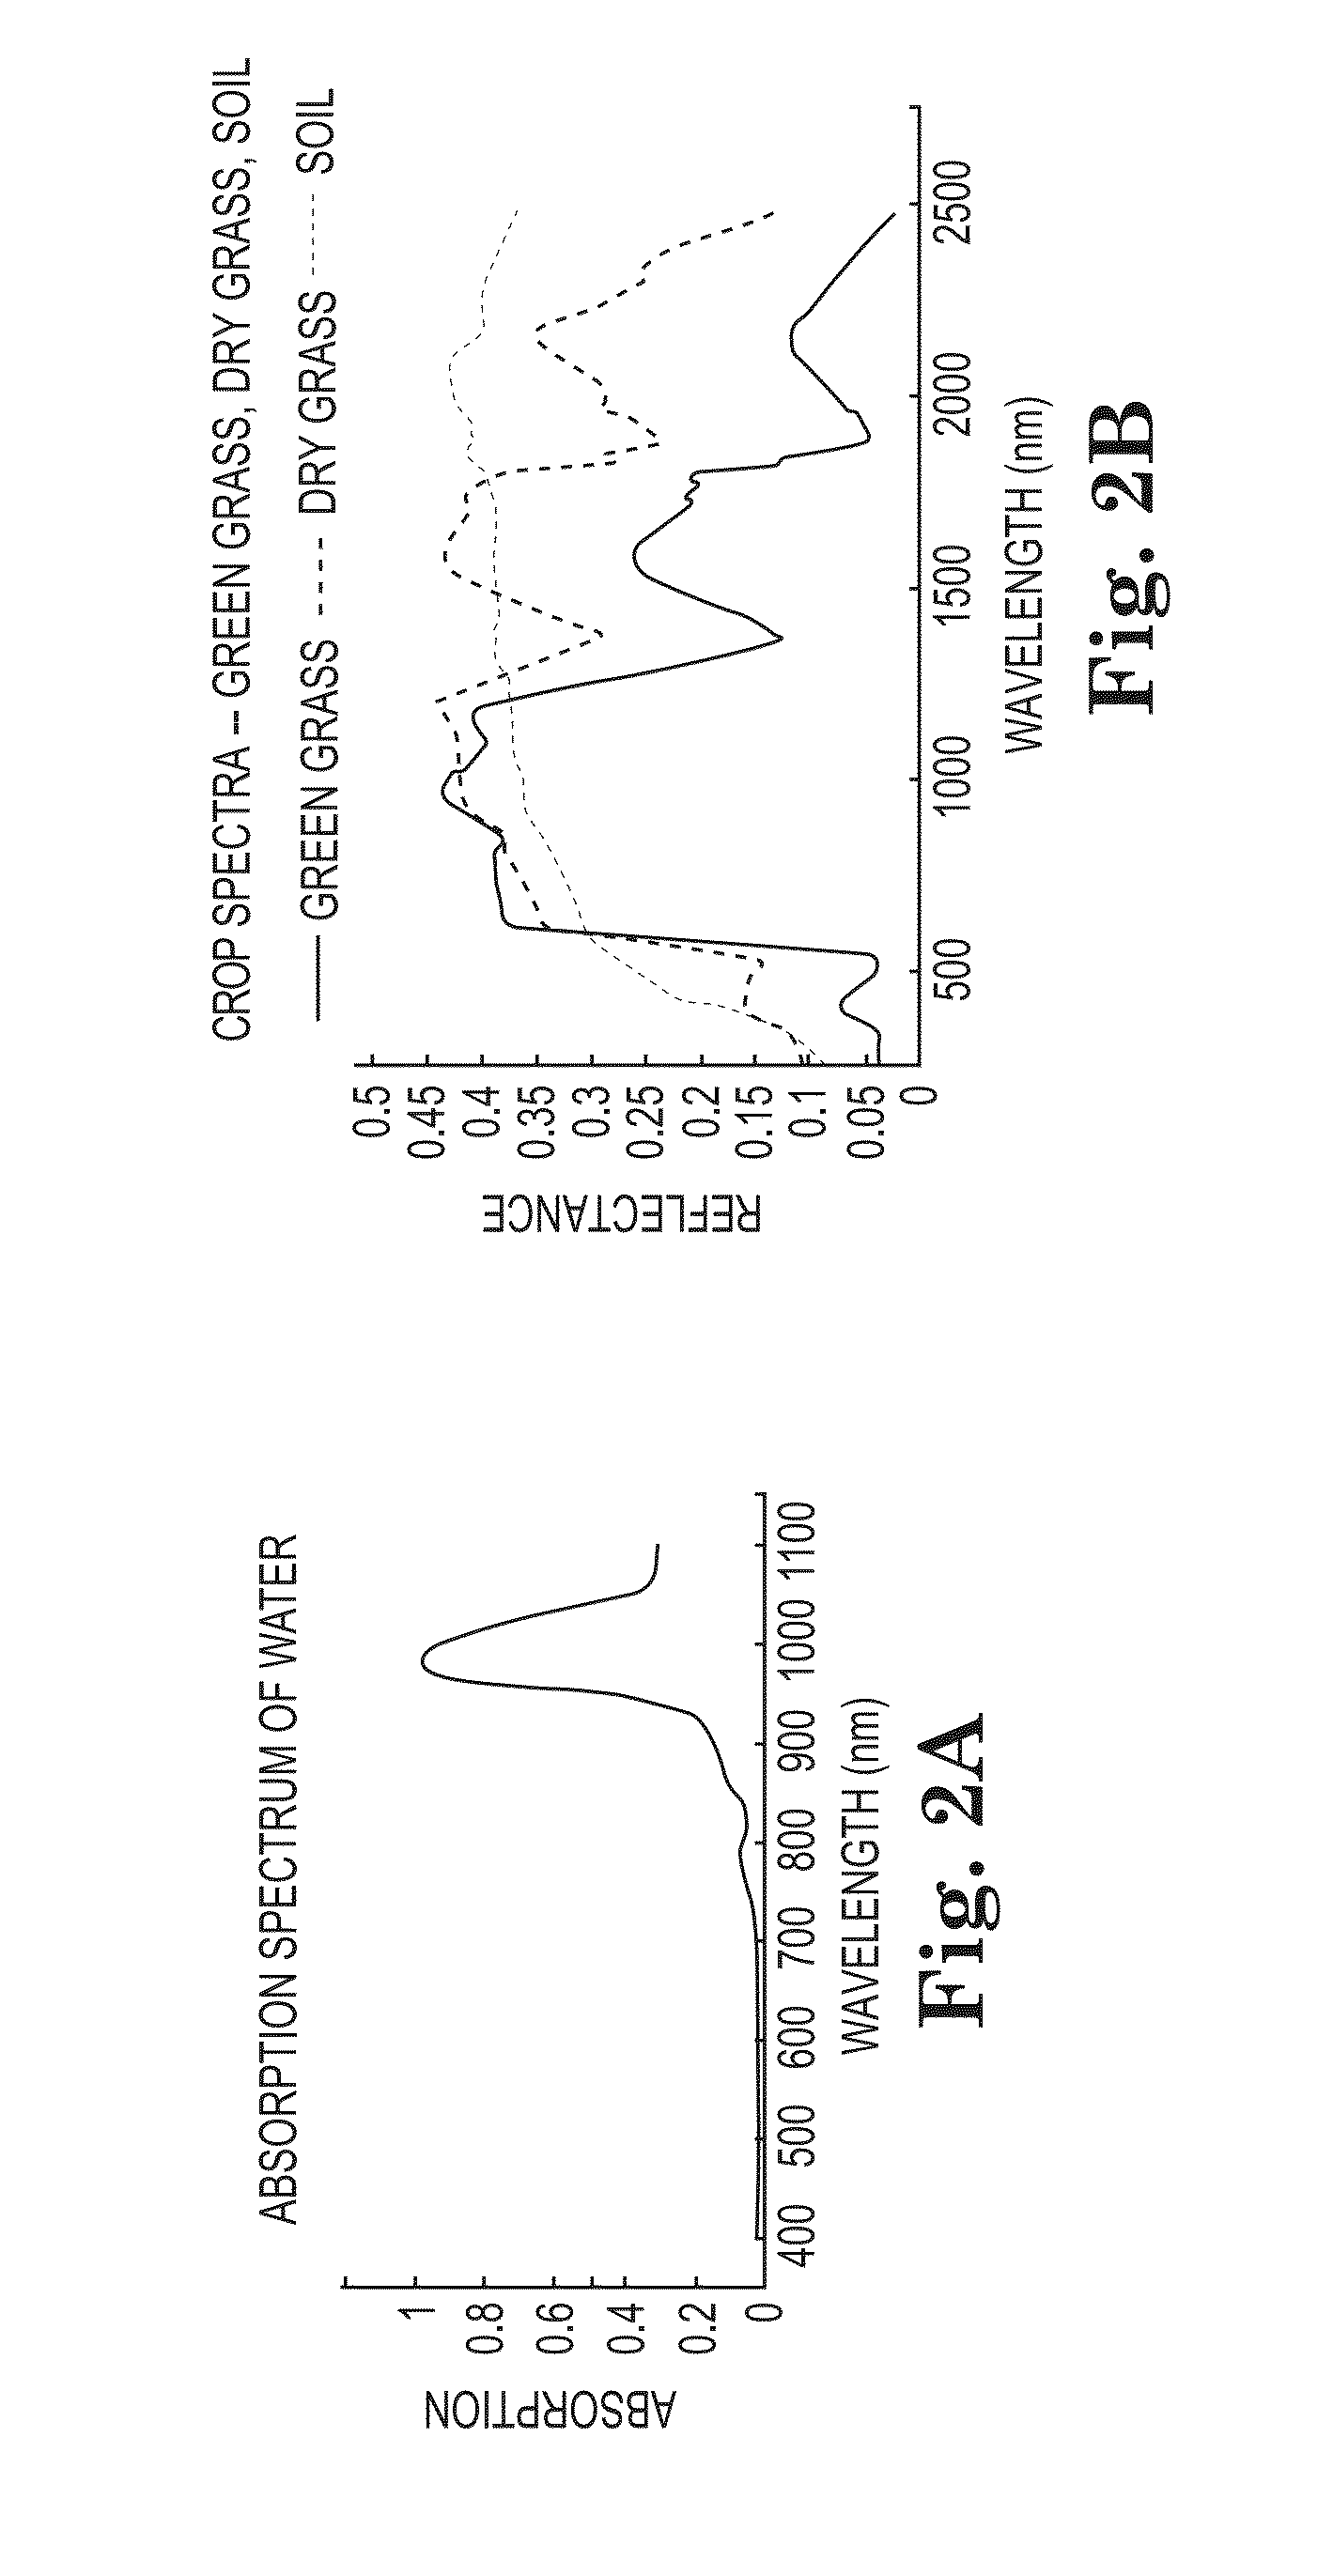 Spectral imaging system for remote and noninvasive detection of target substances using spectral filter arrays and image capture arrays